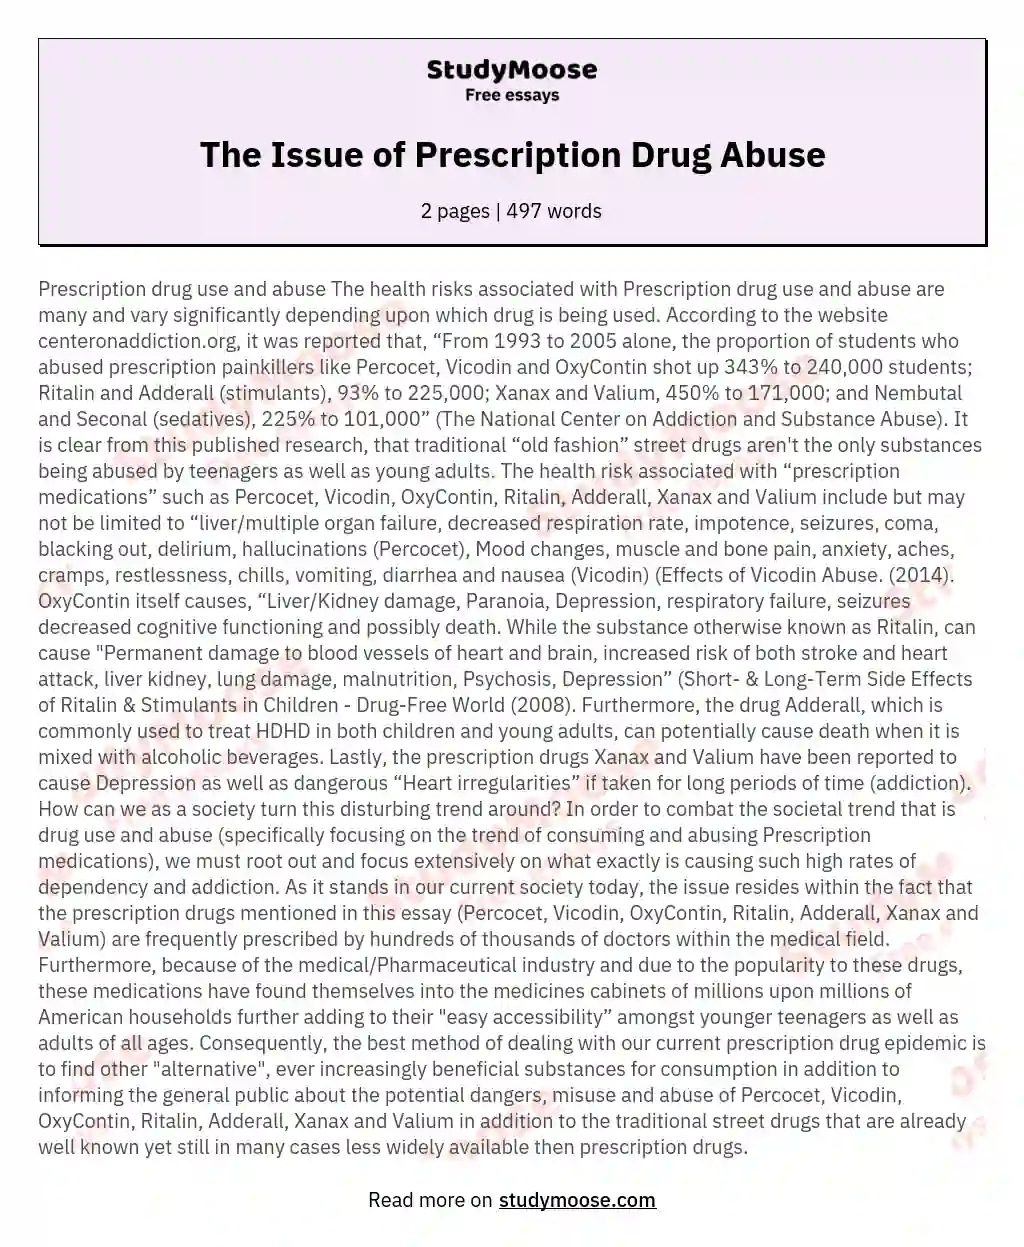 The Issue of Prescription Drug Abuse essay